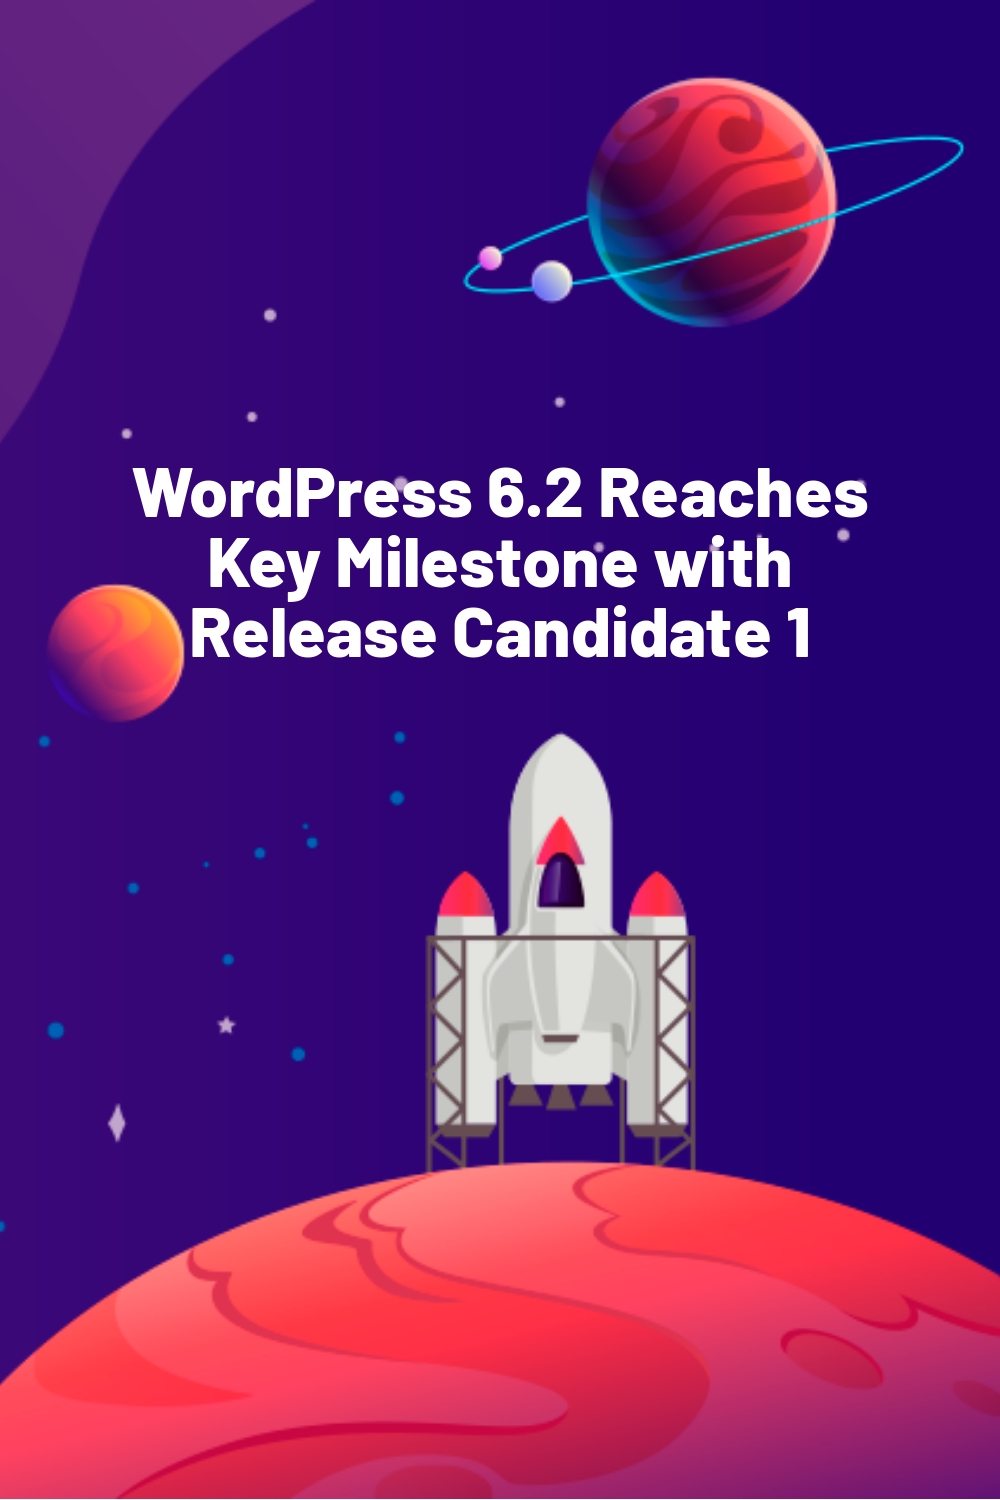 WordPress 6.2 Reaches Key Milestone with Release Candidate 1